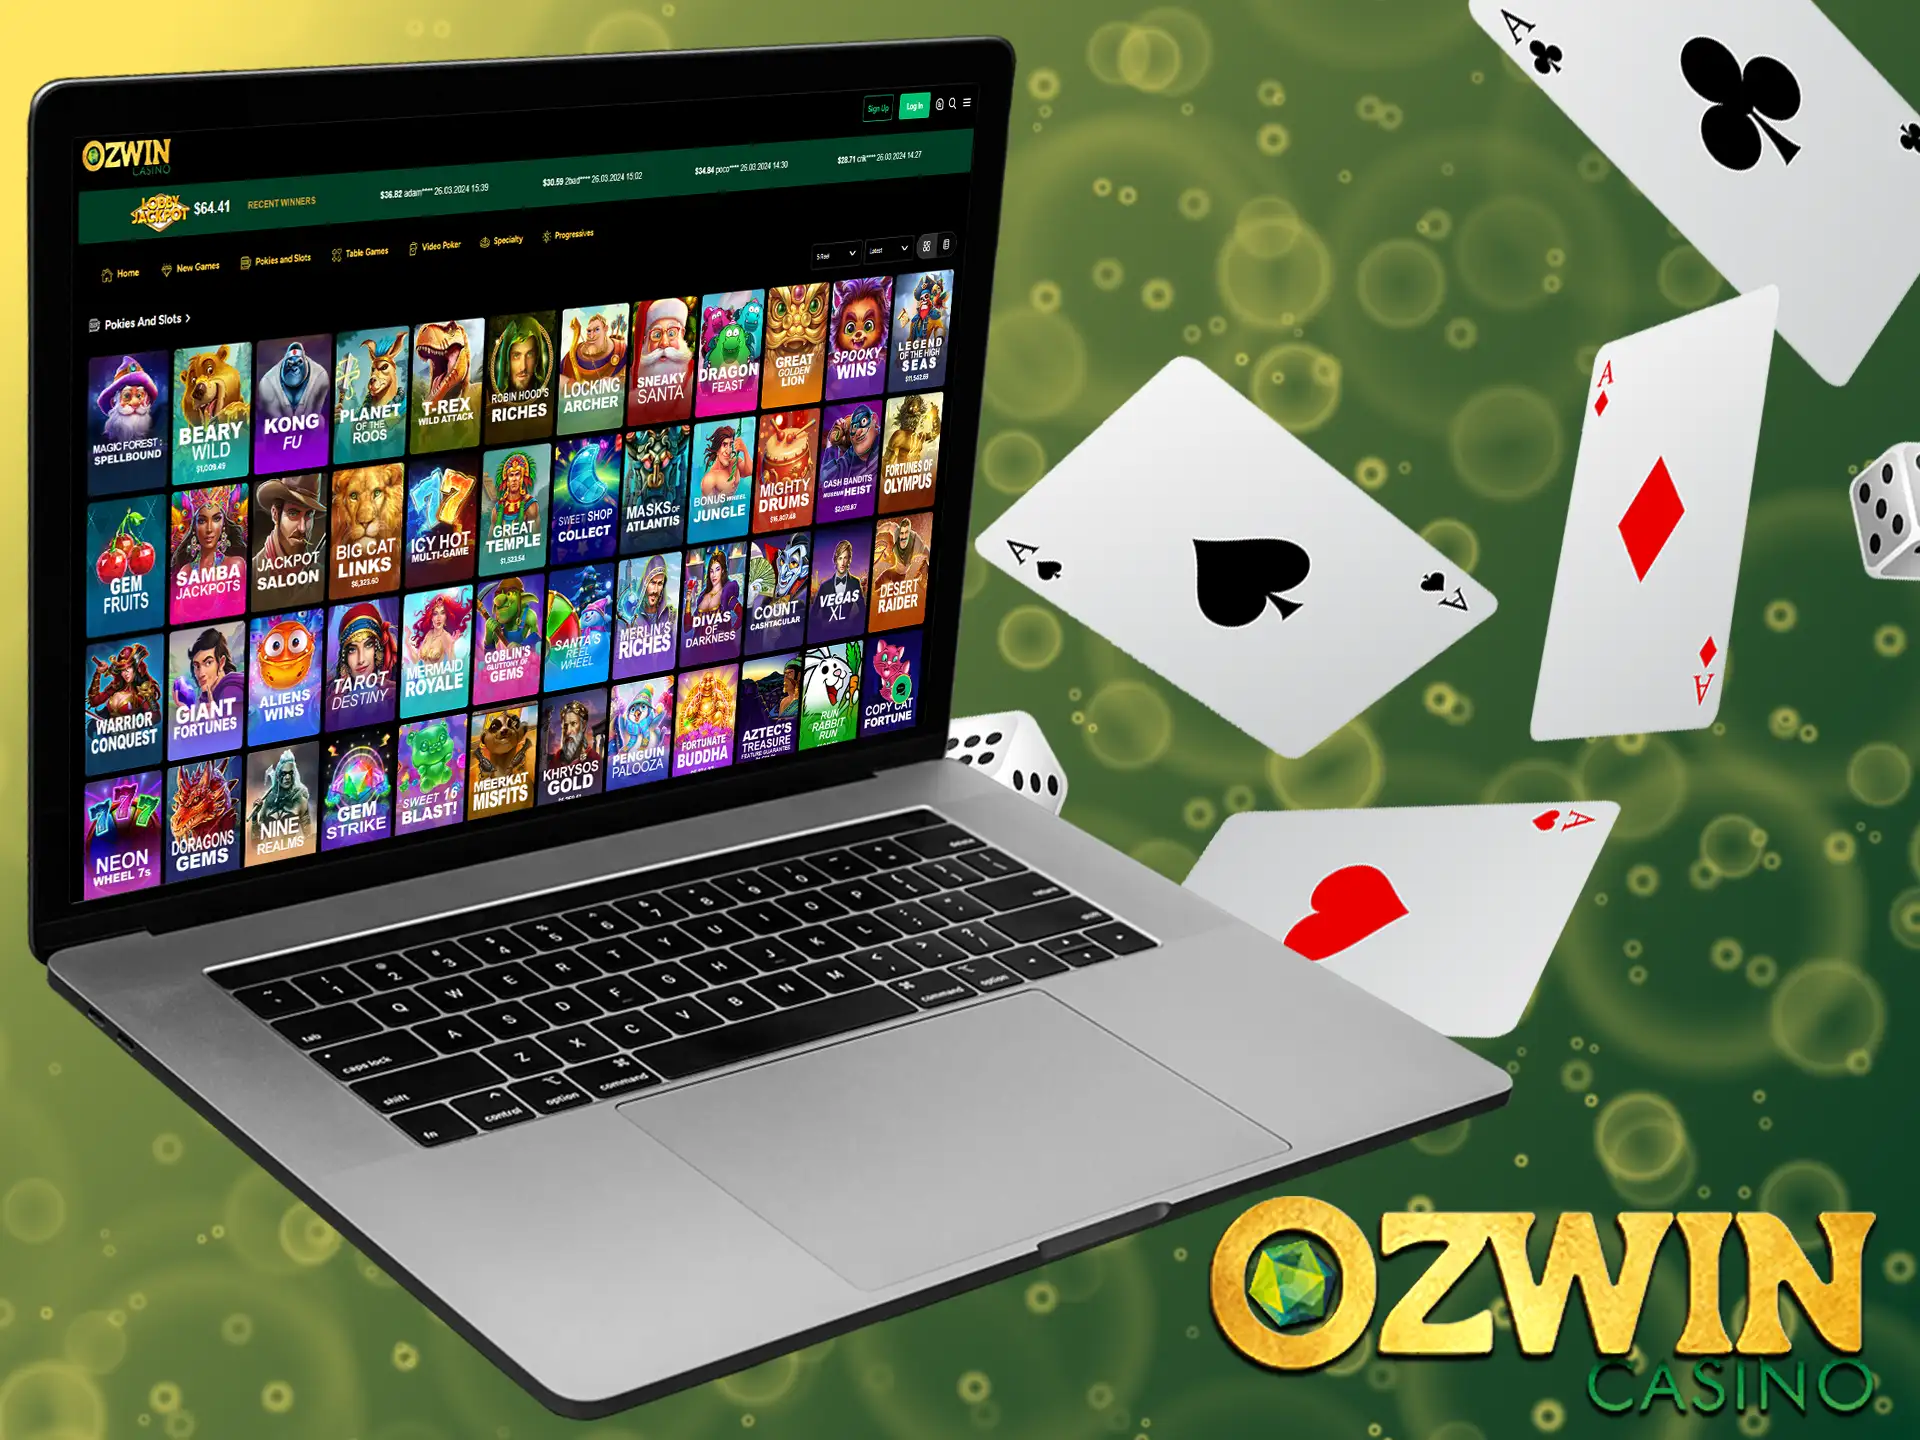 Ozwin currently only provides gambling services and does not offer sports betting.